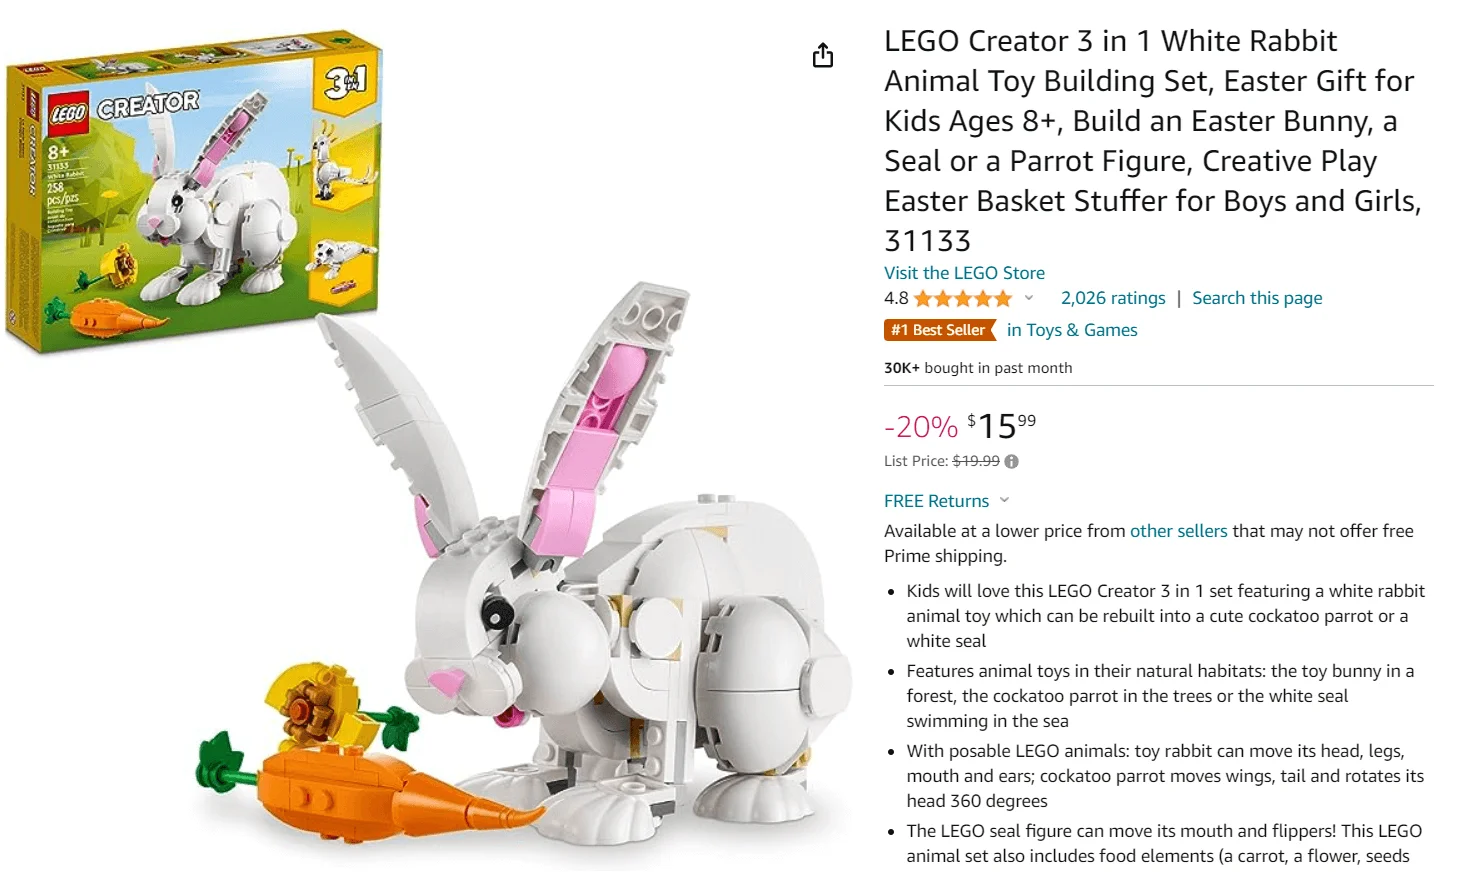 Best Selling Product On Amazon in Toys